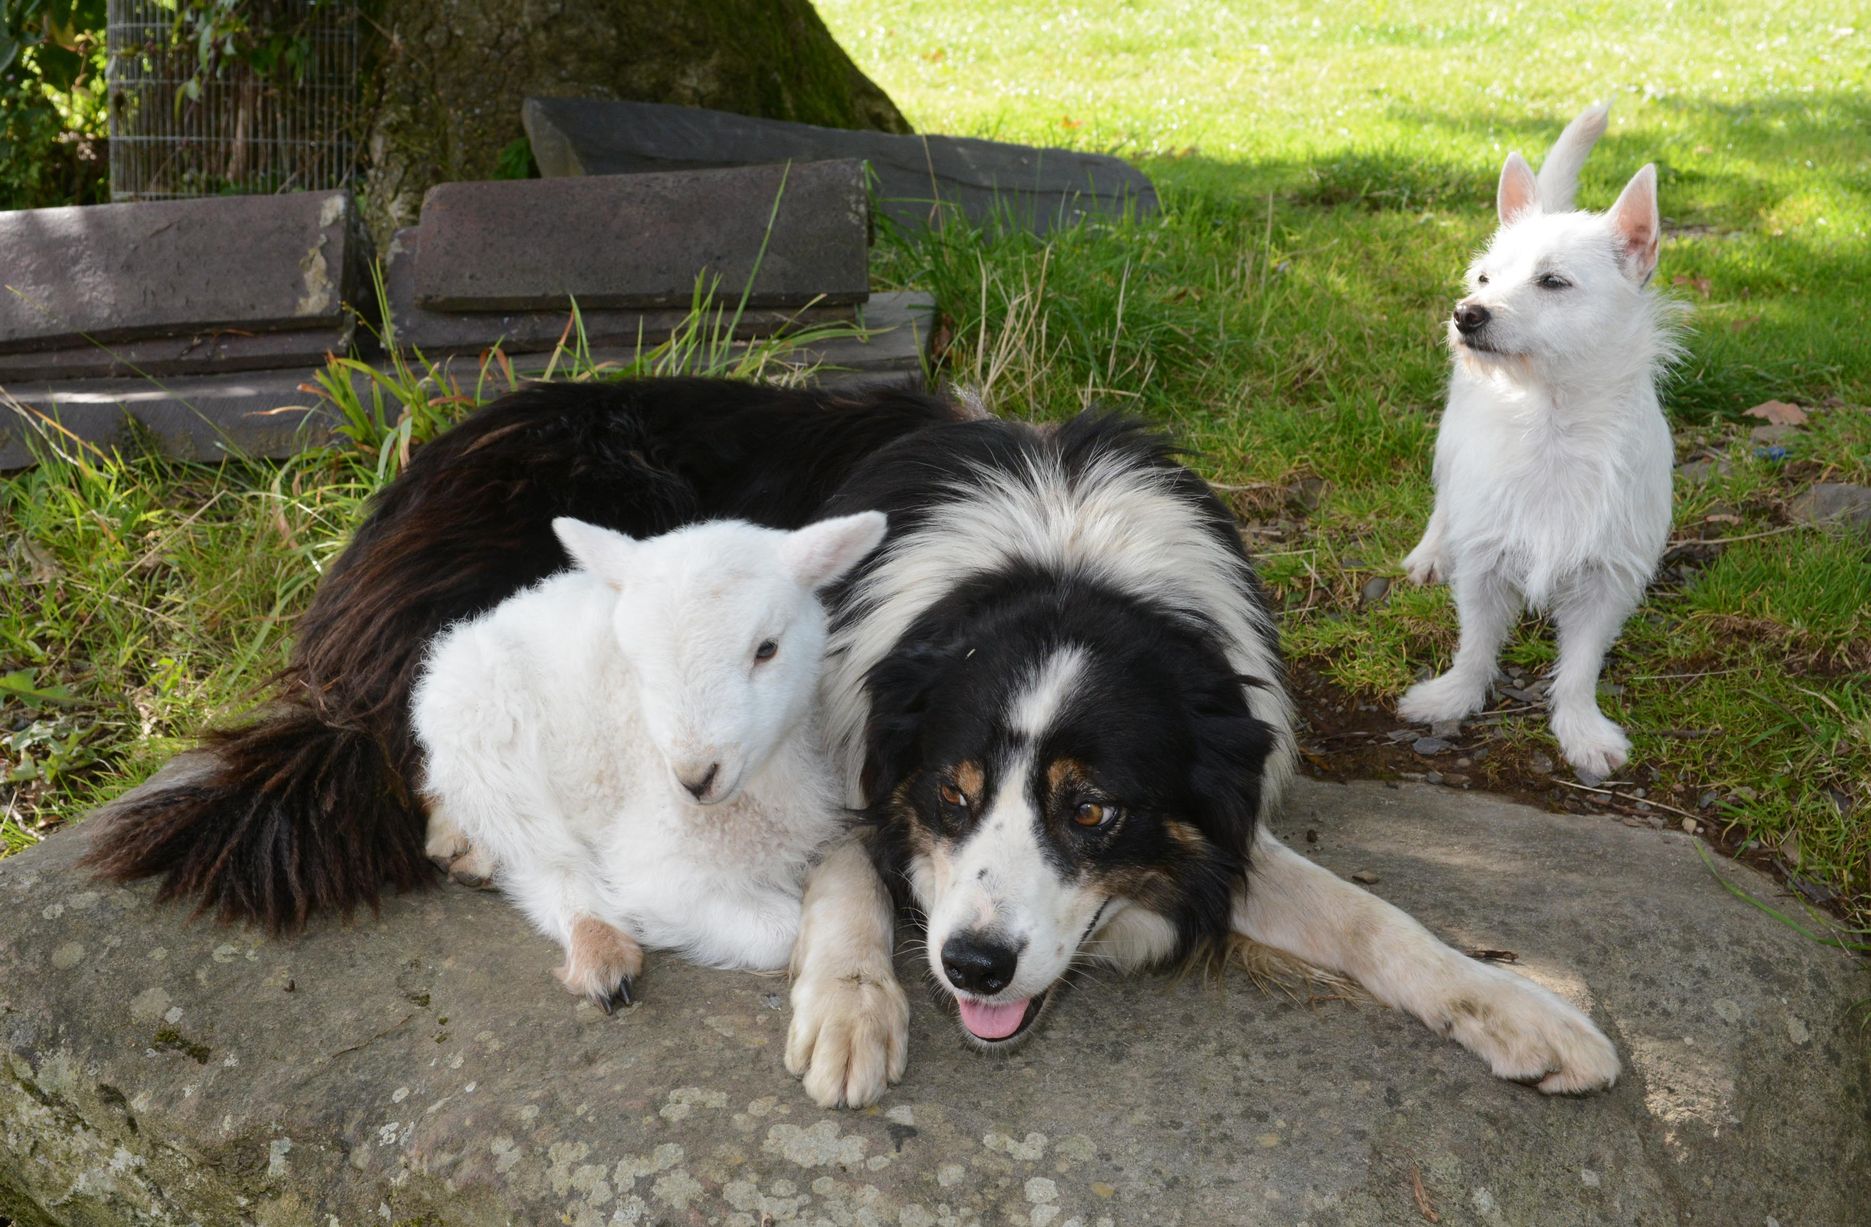 The real sheep dog: Medi the 'canine' lamb - Daily Post